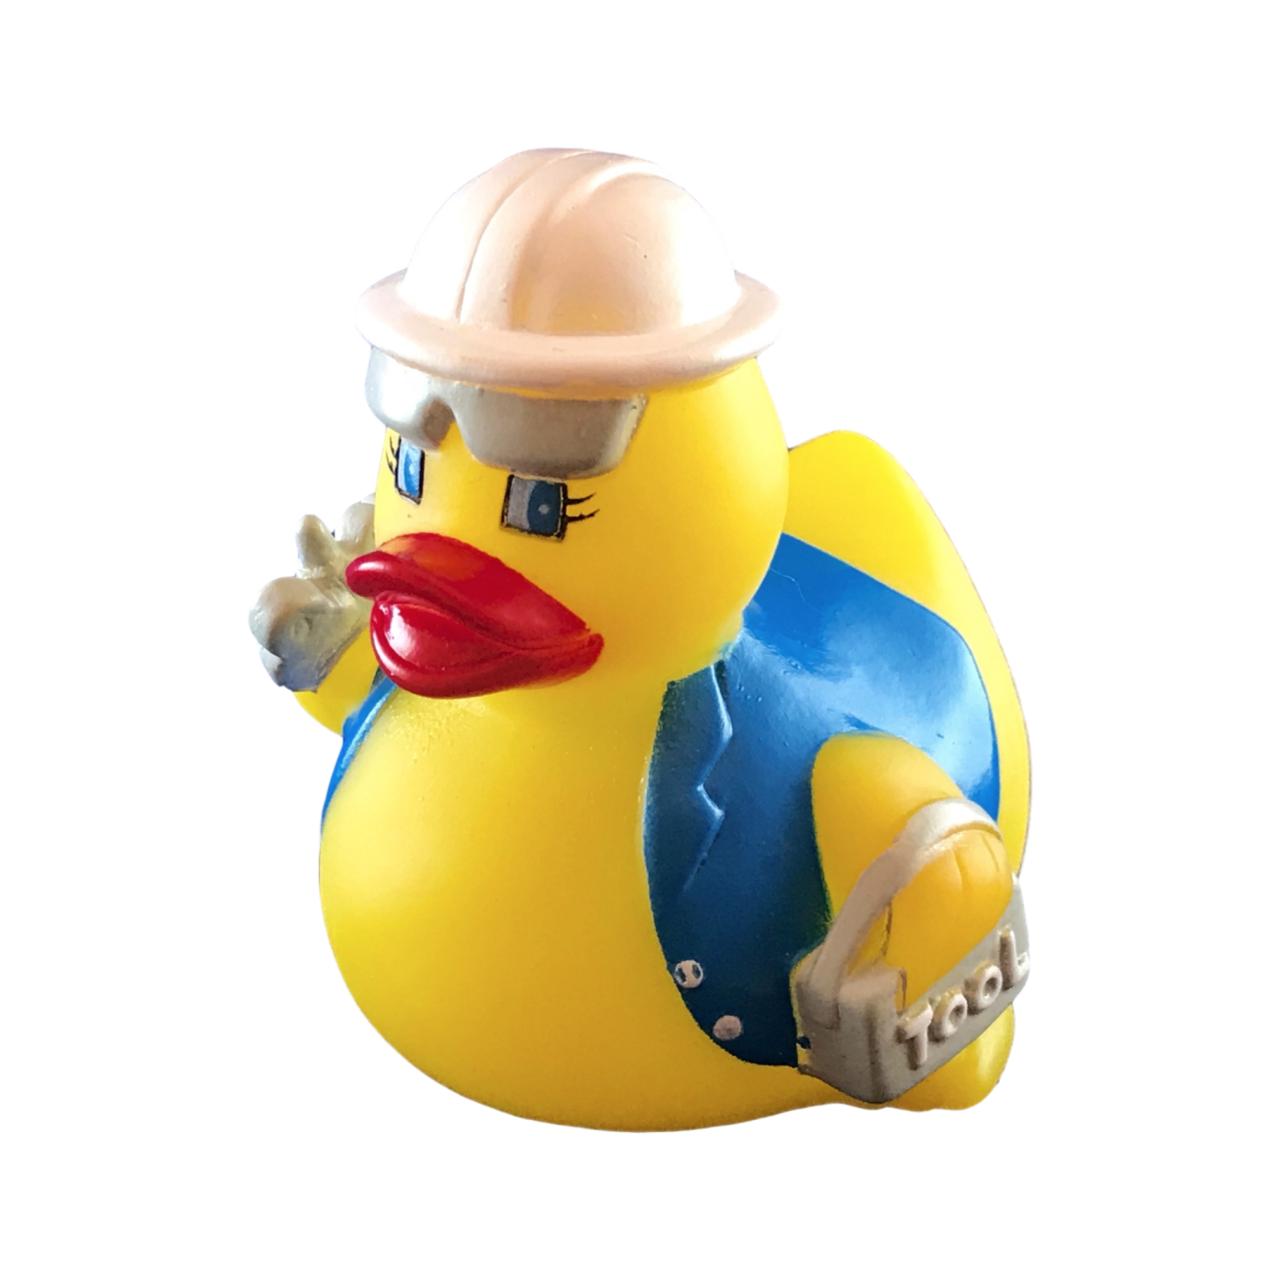 Rubber Elvis Duck- Personalized Rubber Ducks For Sale For $4.50 Only – DUCKY  CITY